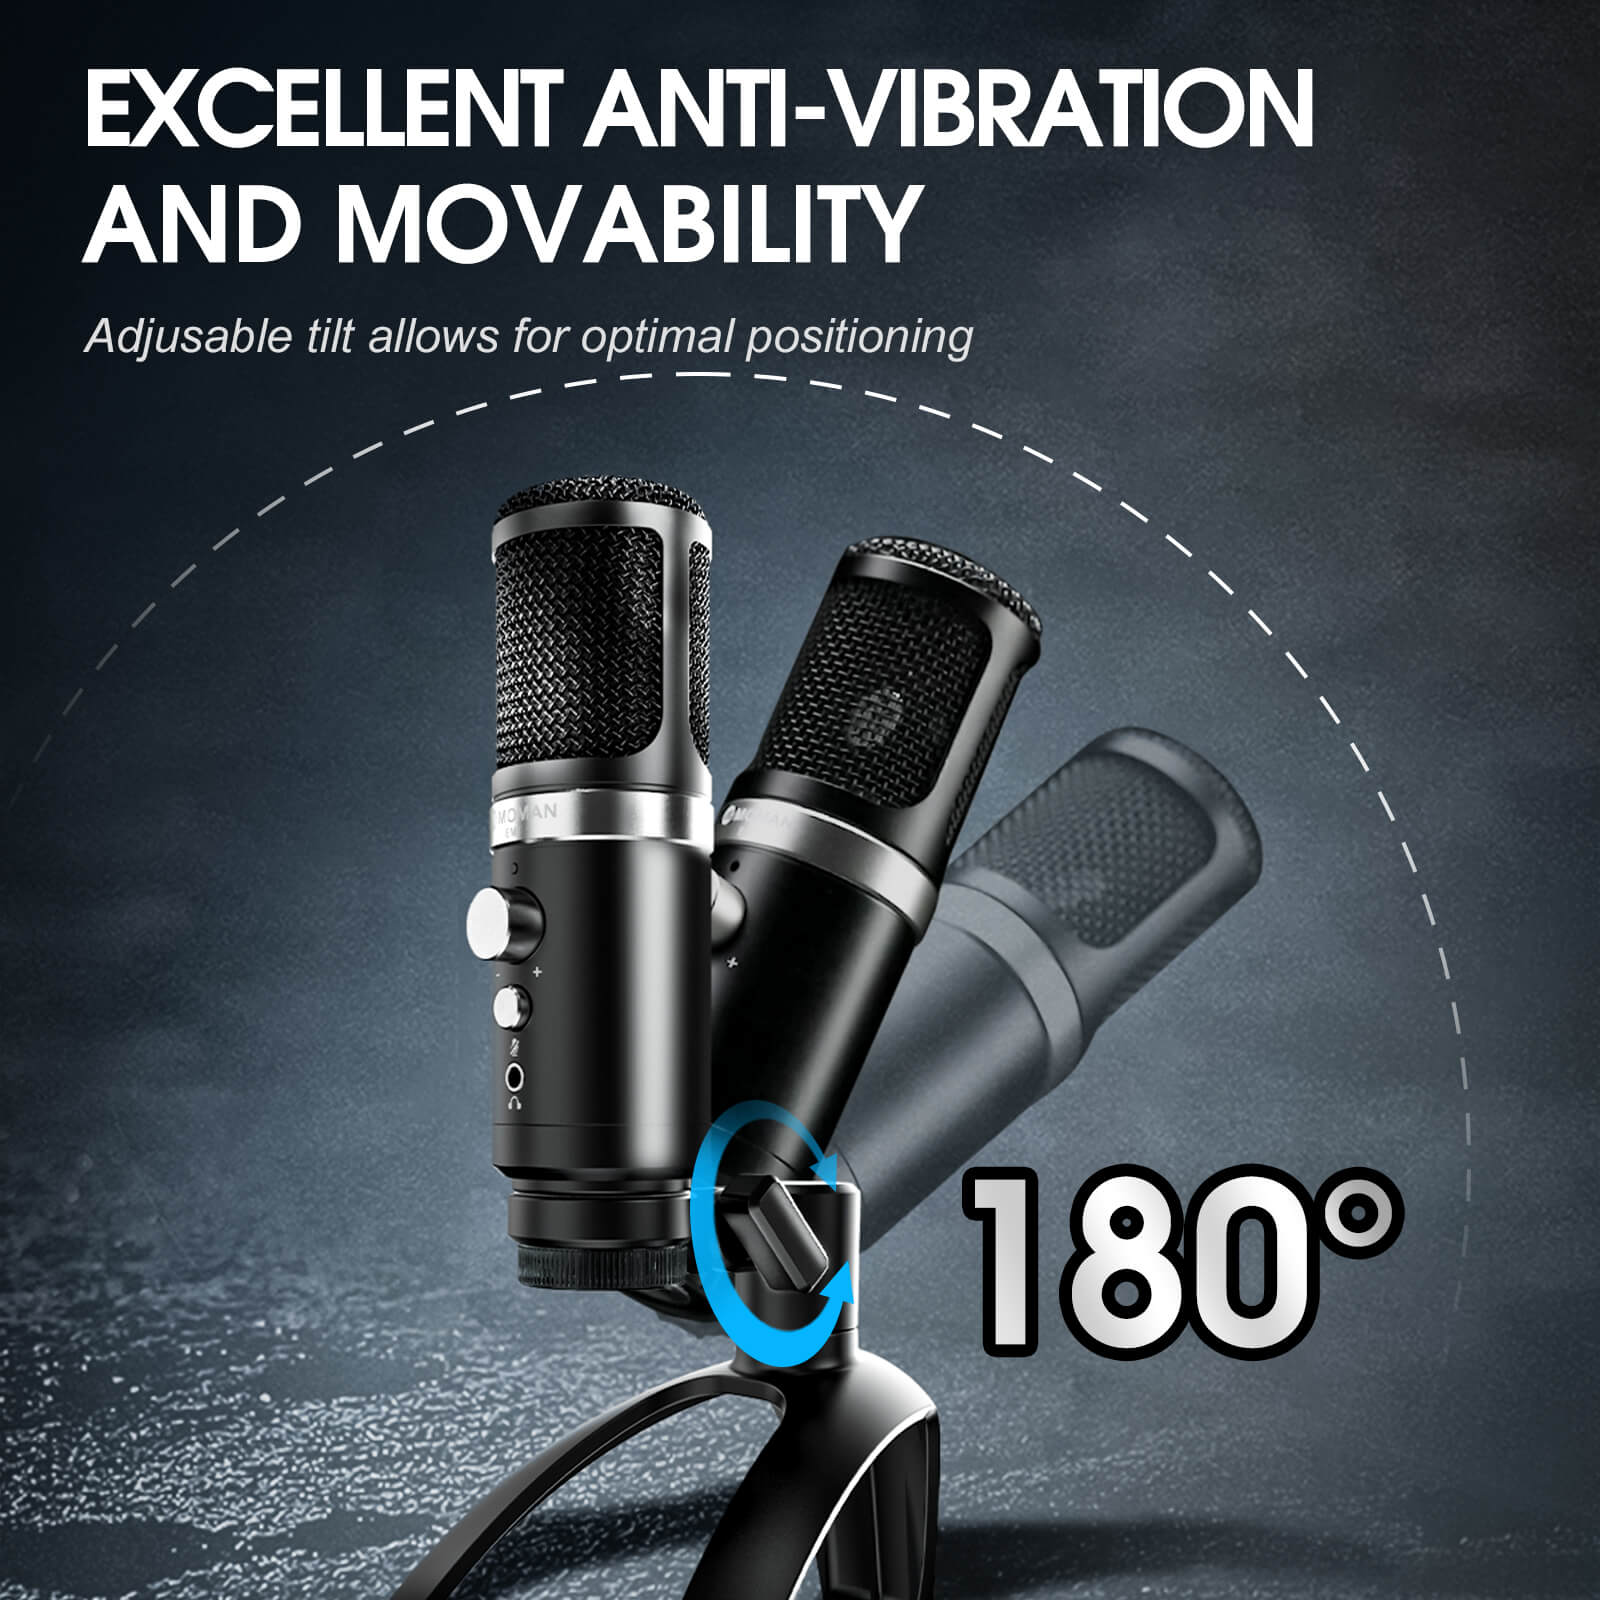 Moman EM1 USB mic with excellent anti-vibration and movability